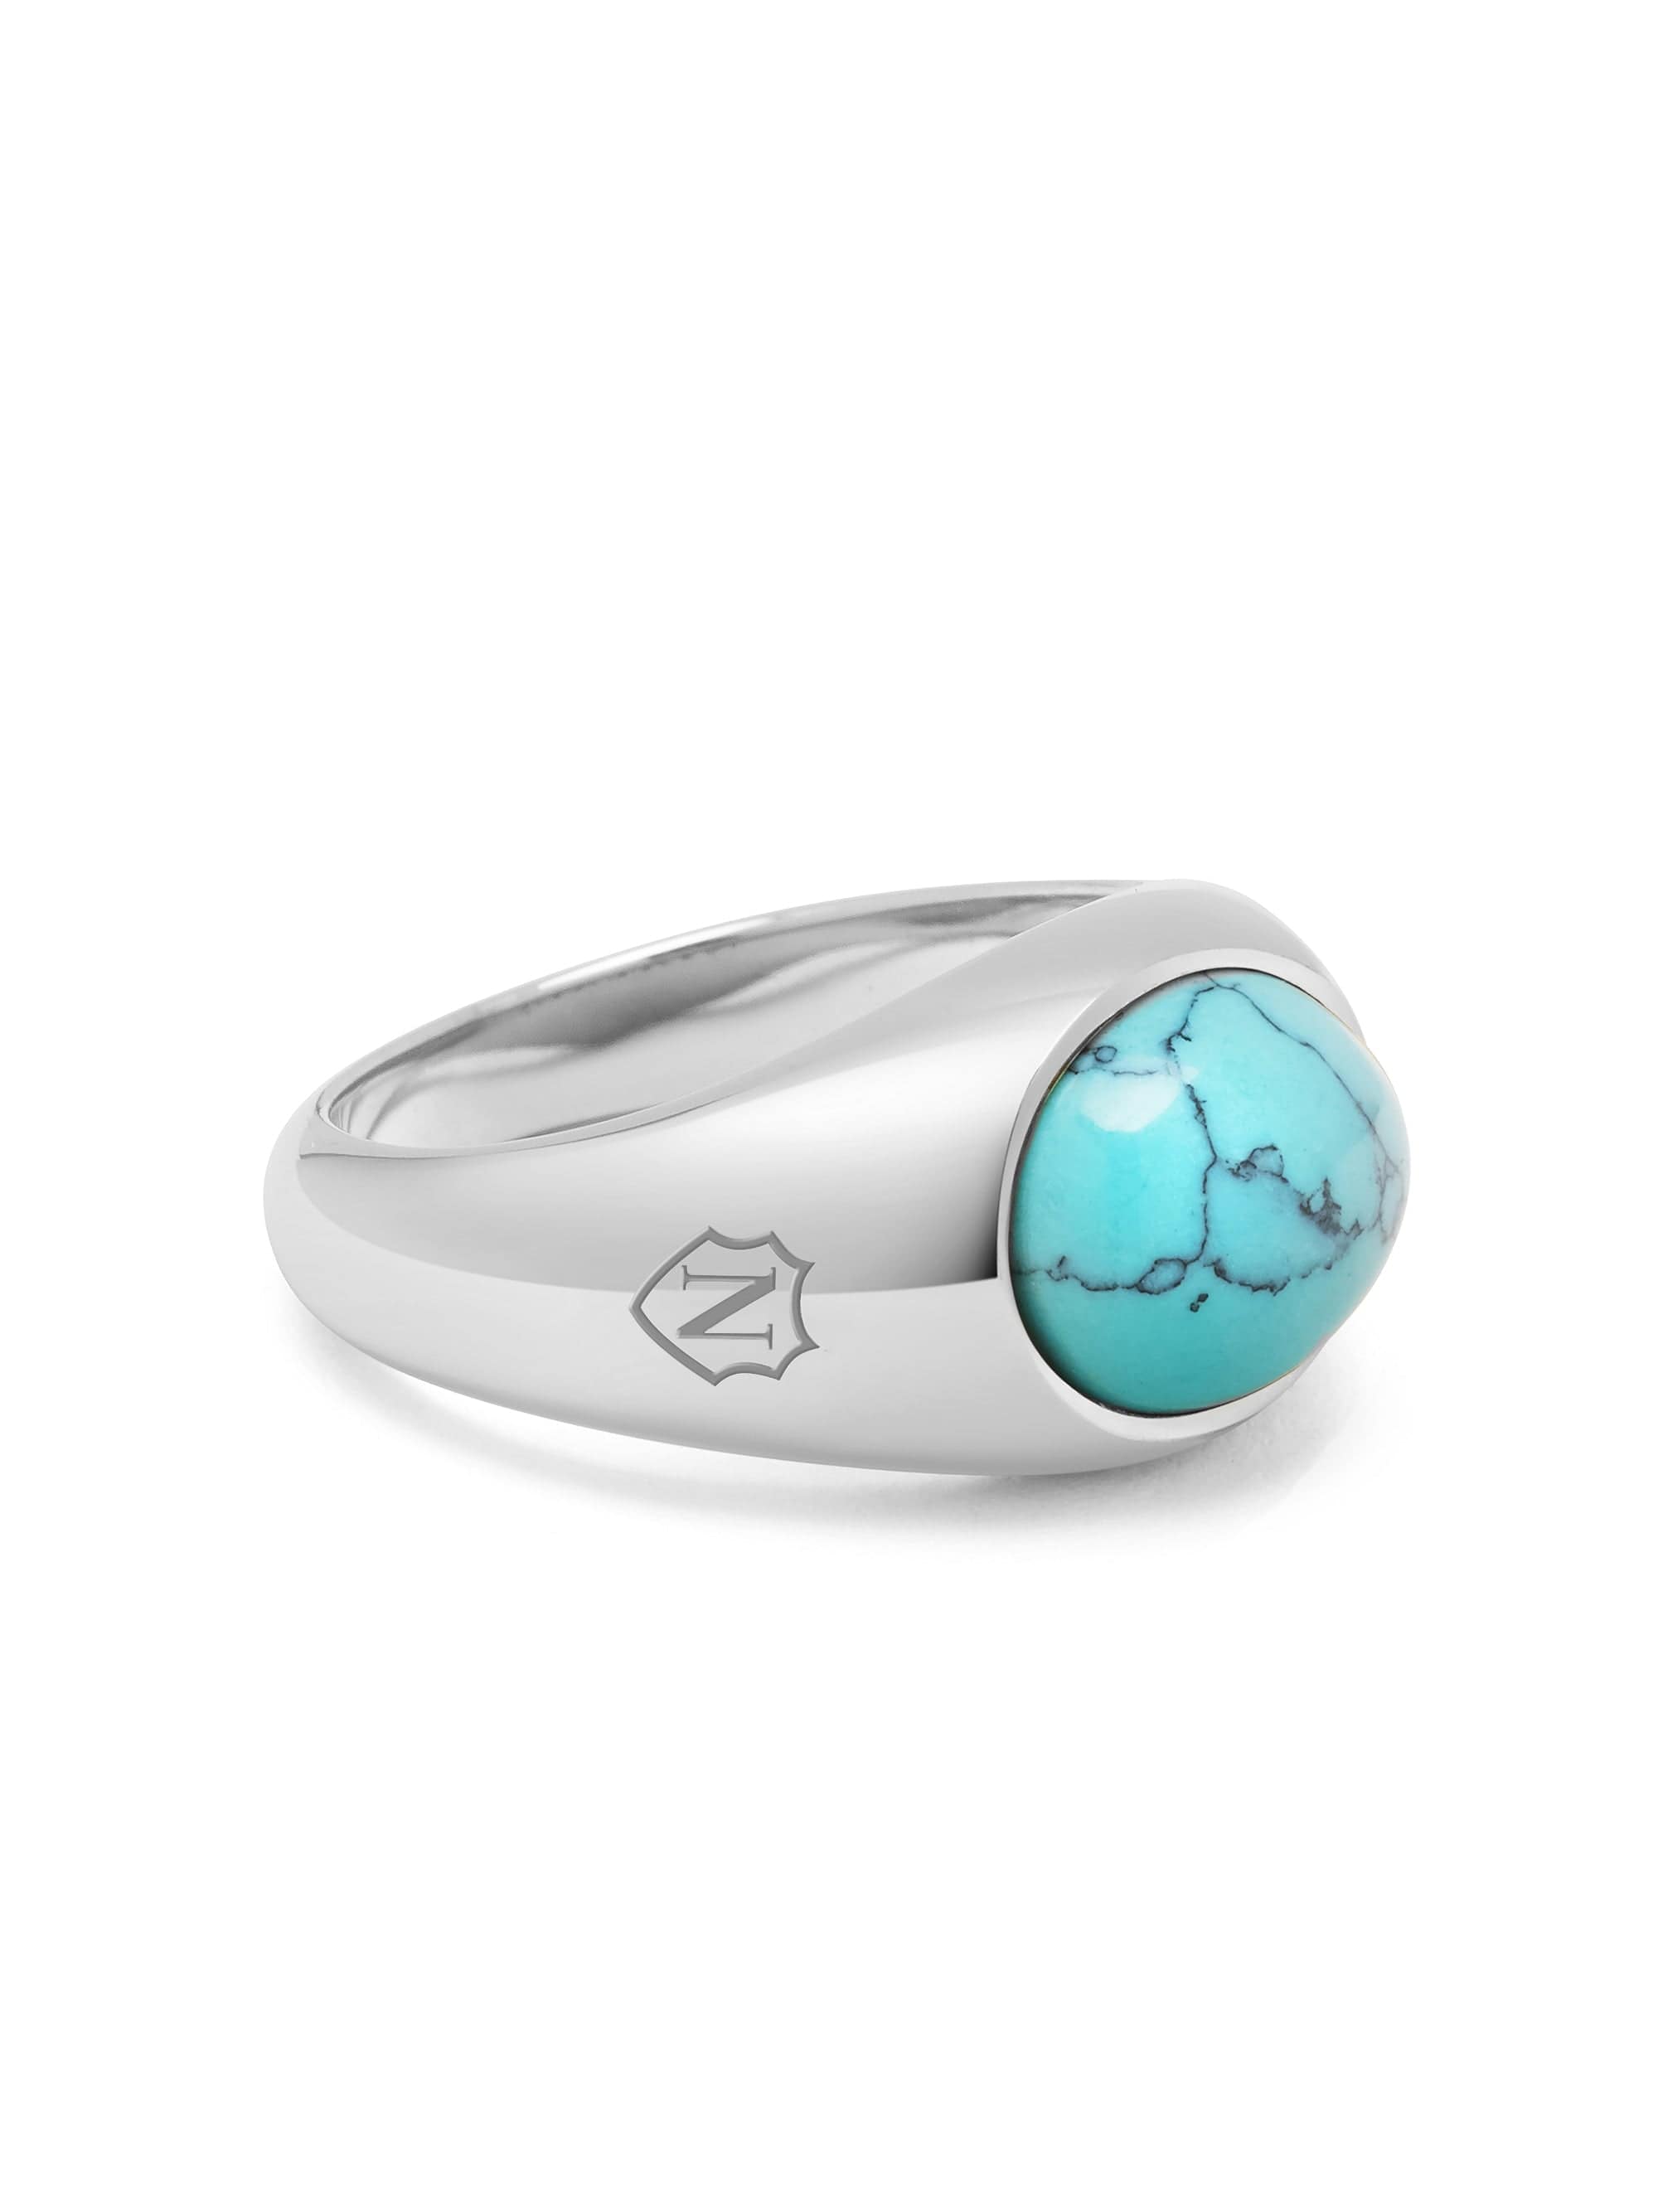 Image of Silver Oval Signet Ring with Turquoise Stone